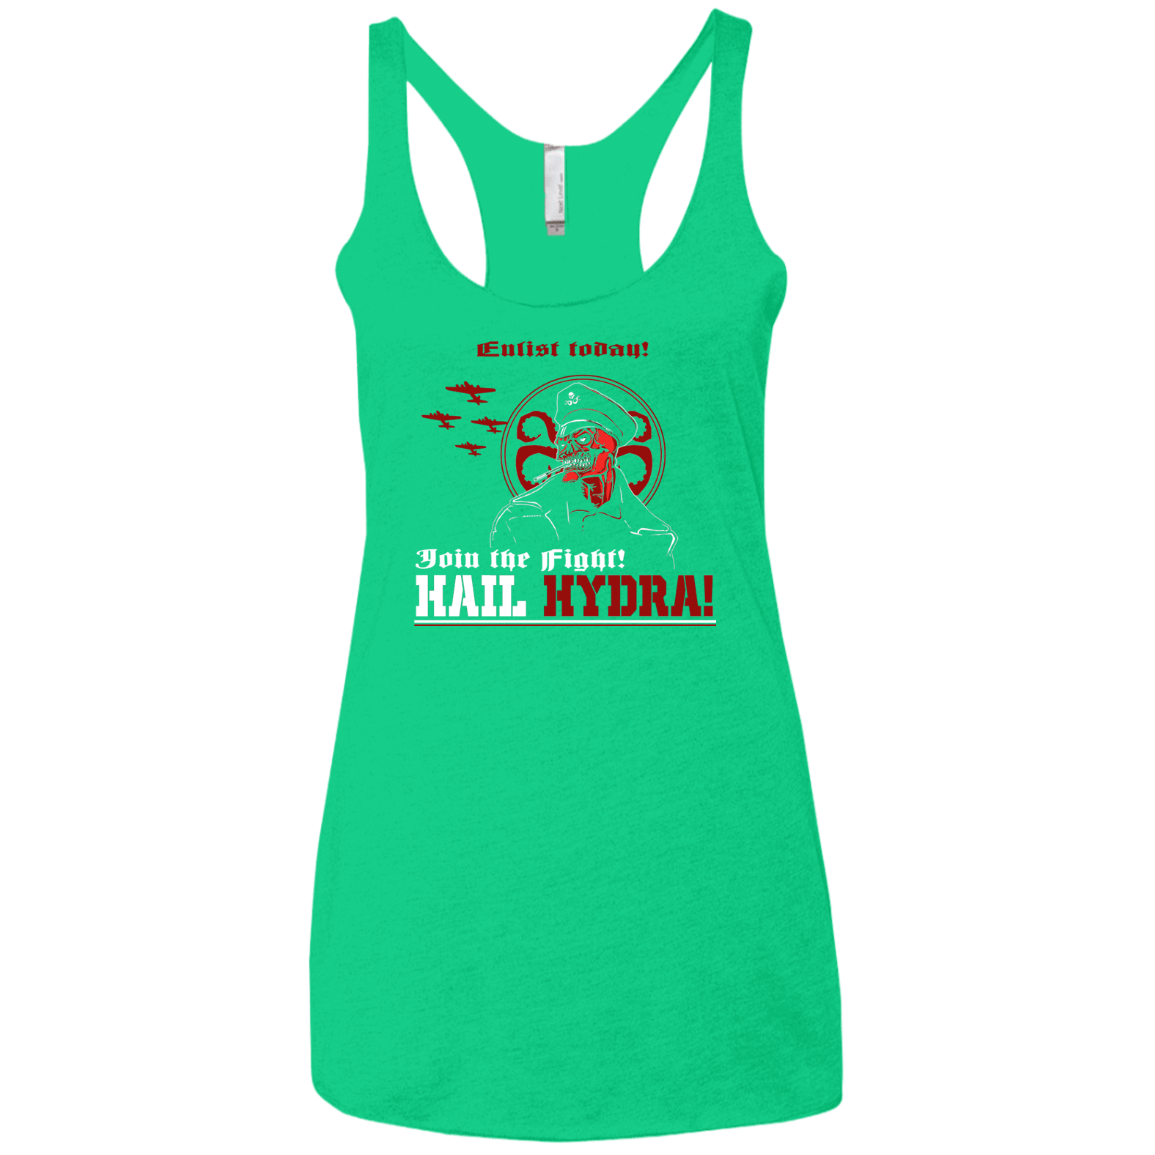 T-Shirts Envy / X-Small Join The Fight Women's Triblend Racerback Tank